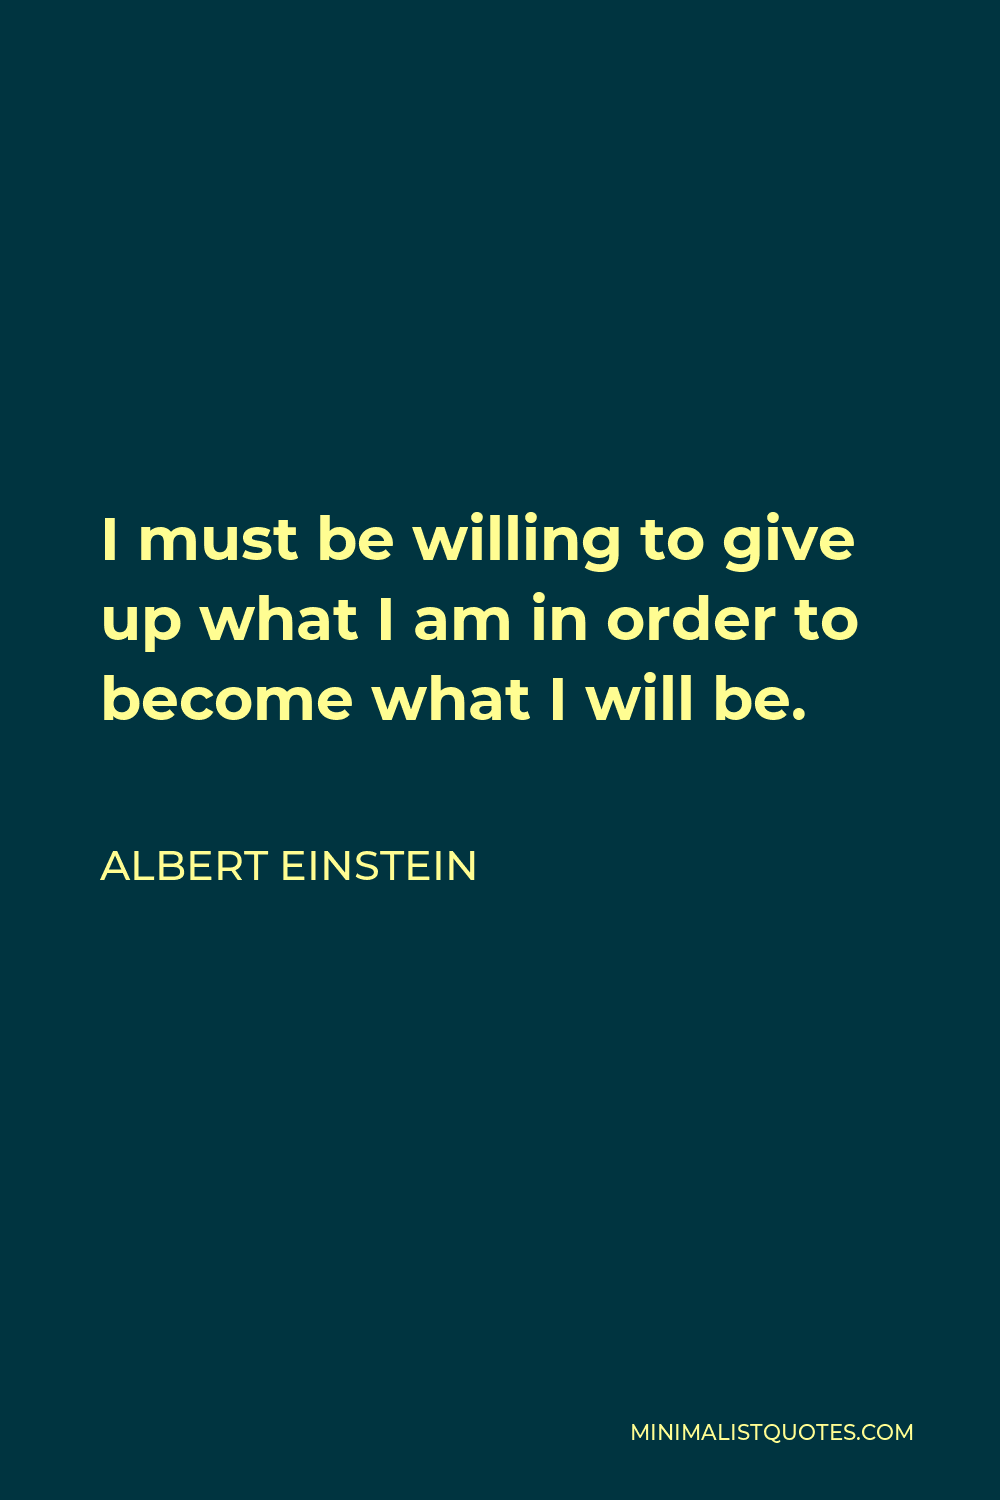 Albert Einstein Quote - I must be willing to give up what I am in order to become what I will be.